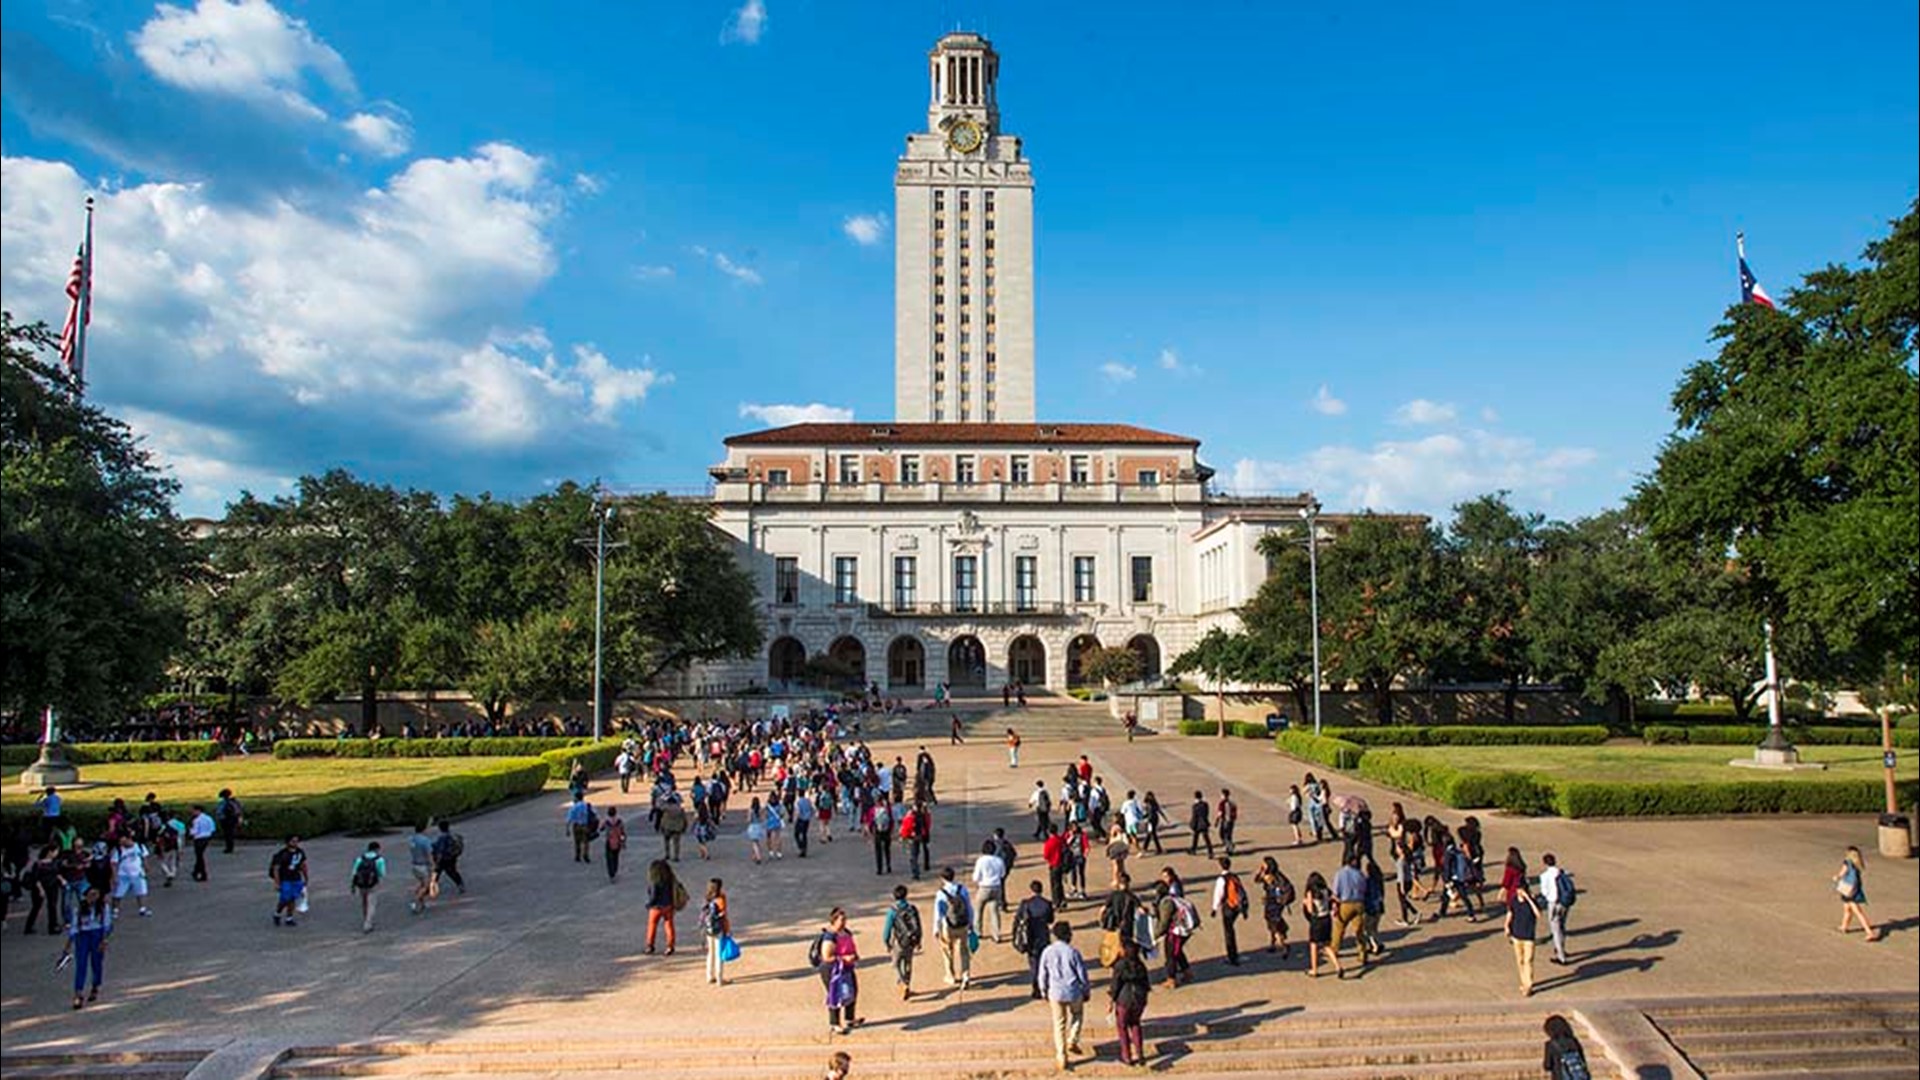 University of Texas will offer free tuition to many students